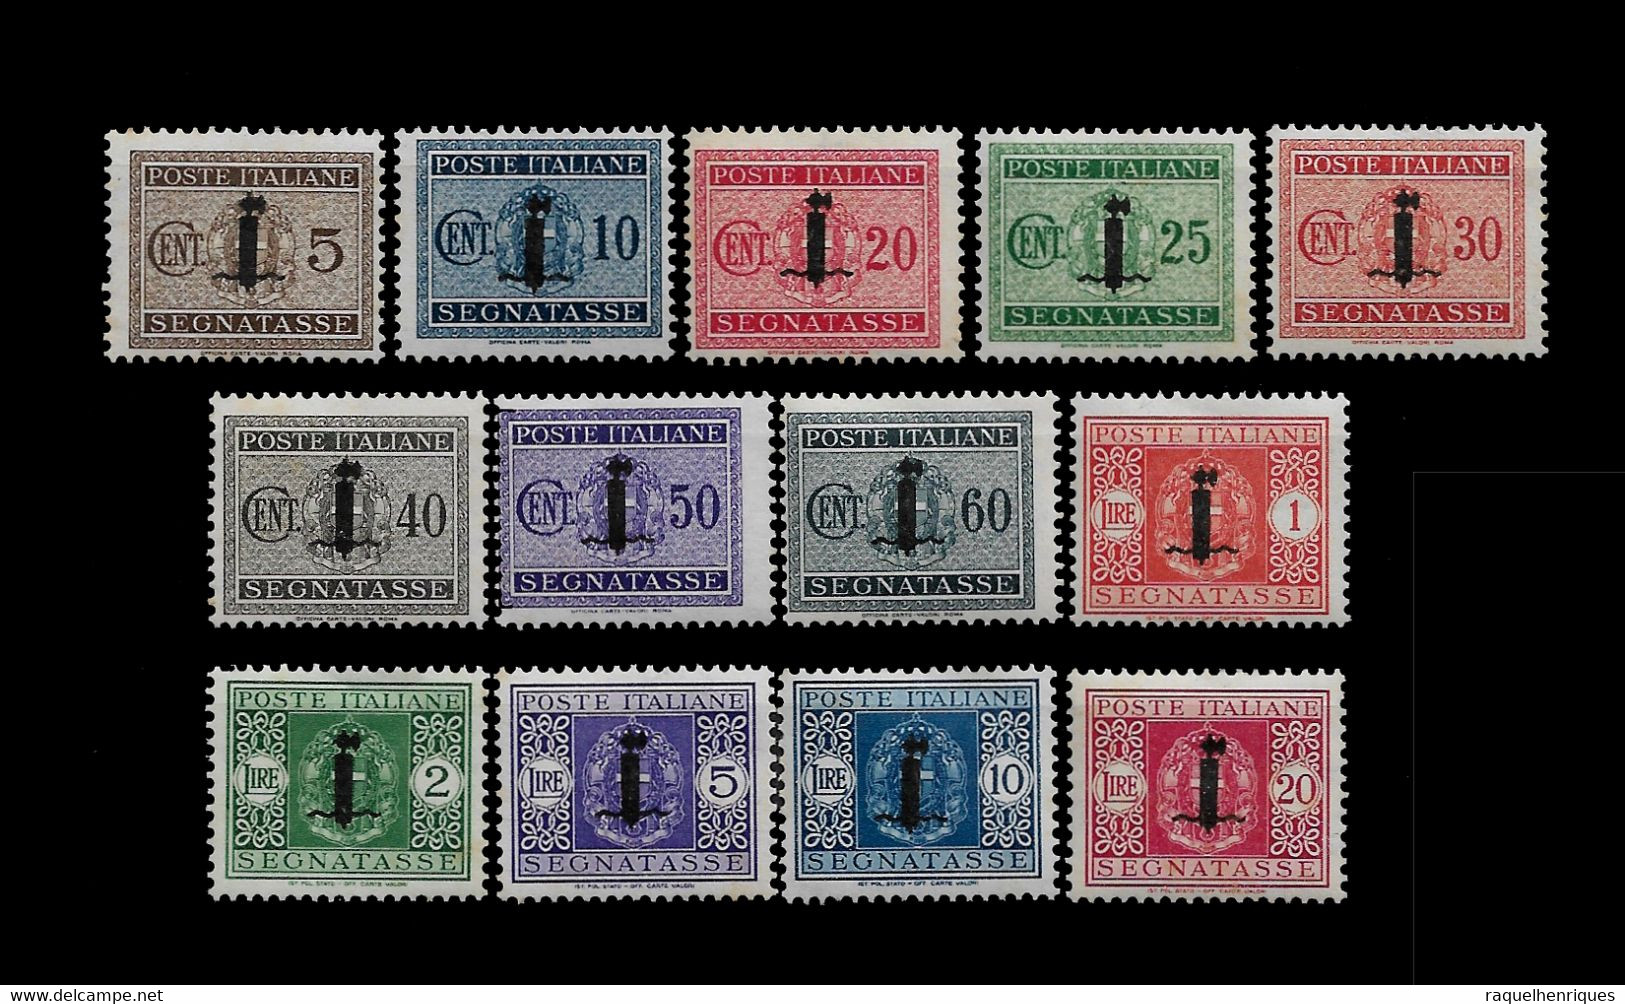 ITALY STAMP - POSTAGE DUE 1944 Postage Due Stamps Of 1934 Overprinted RARE SET MNH (BA5#337) - Strafport